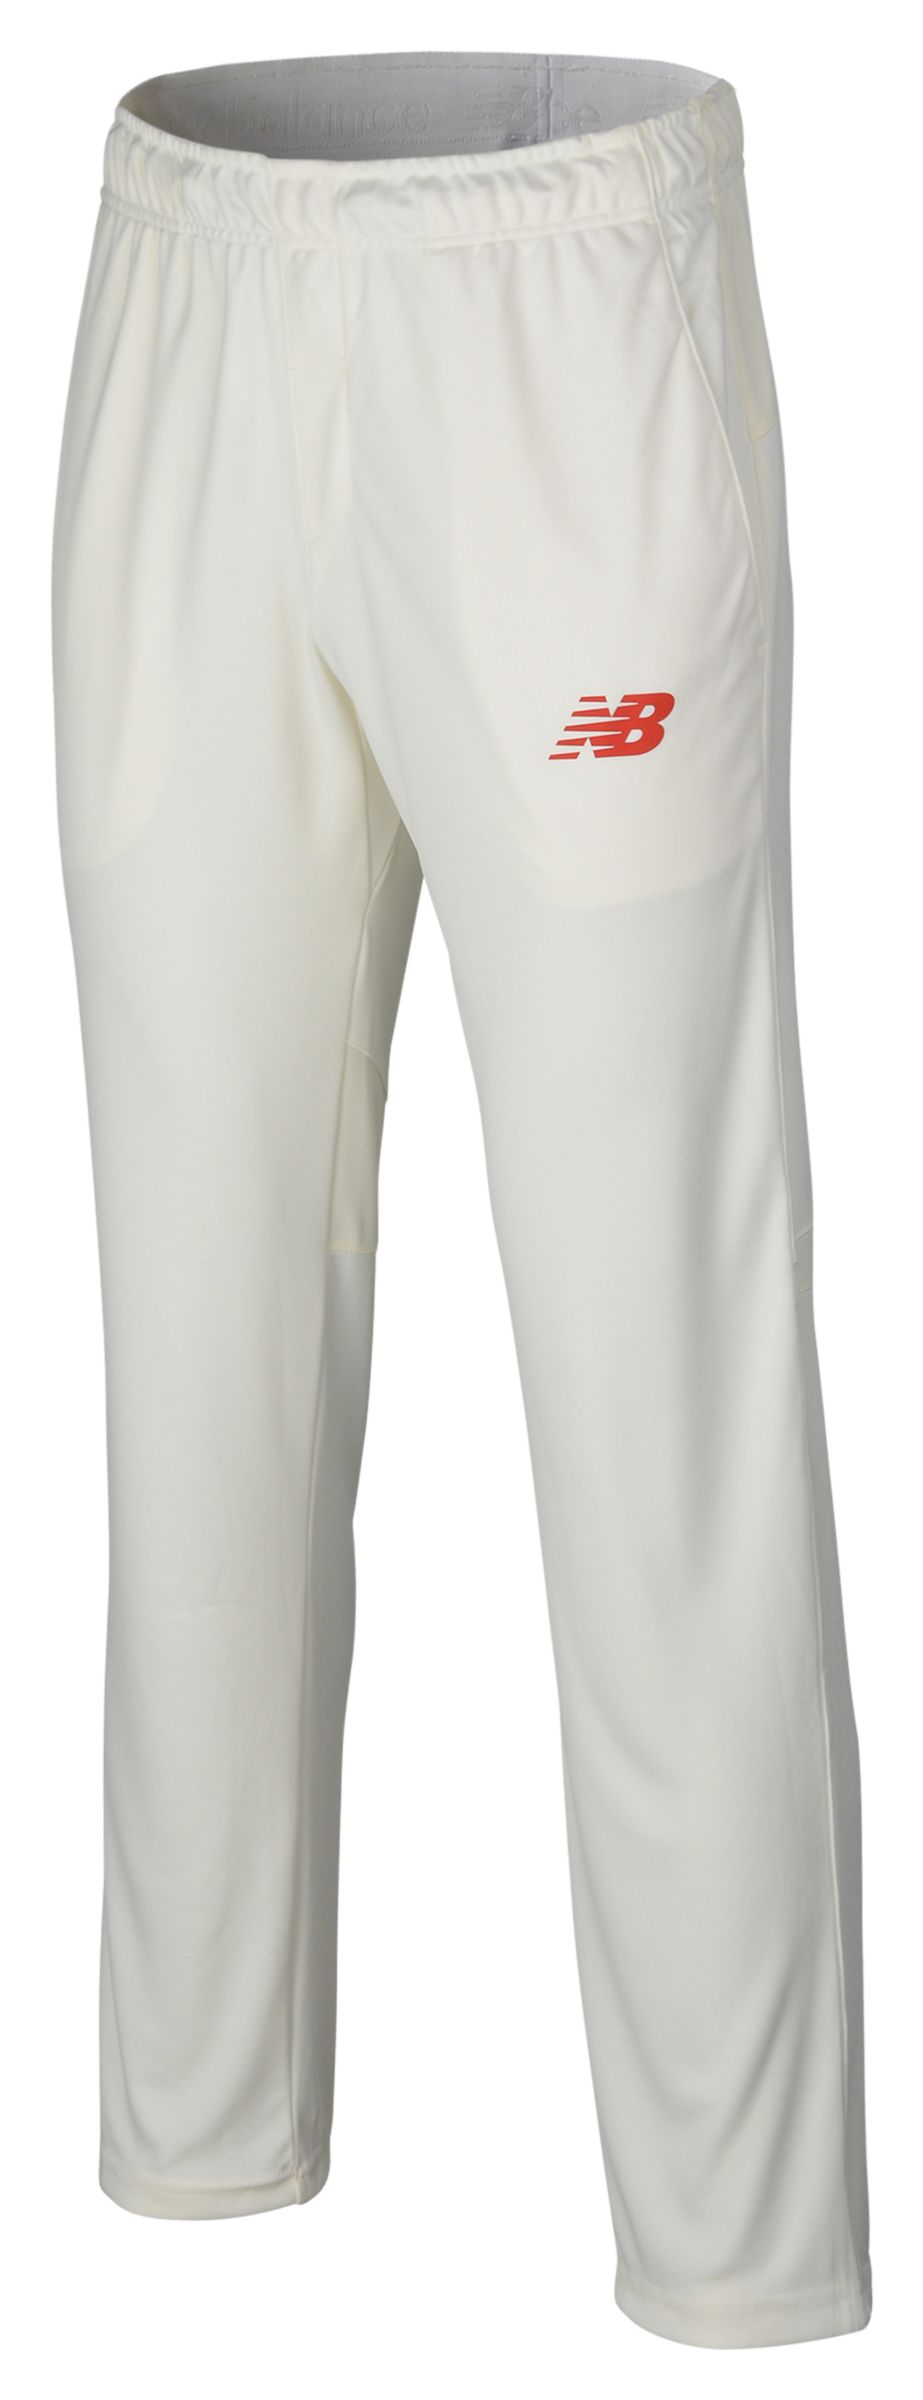 nb cricket trousers